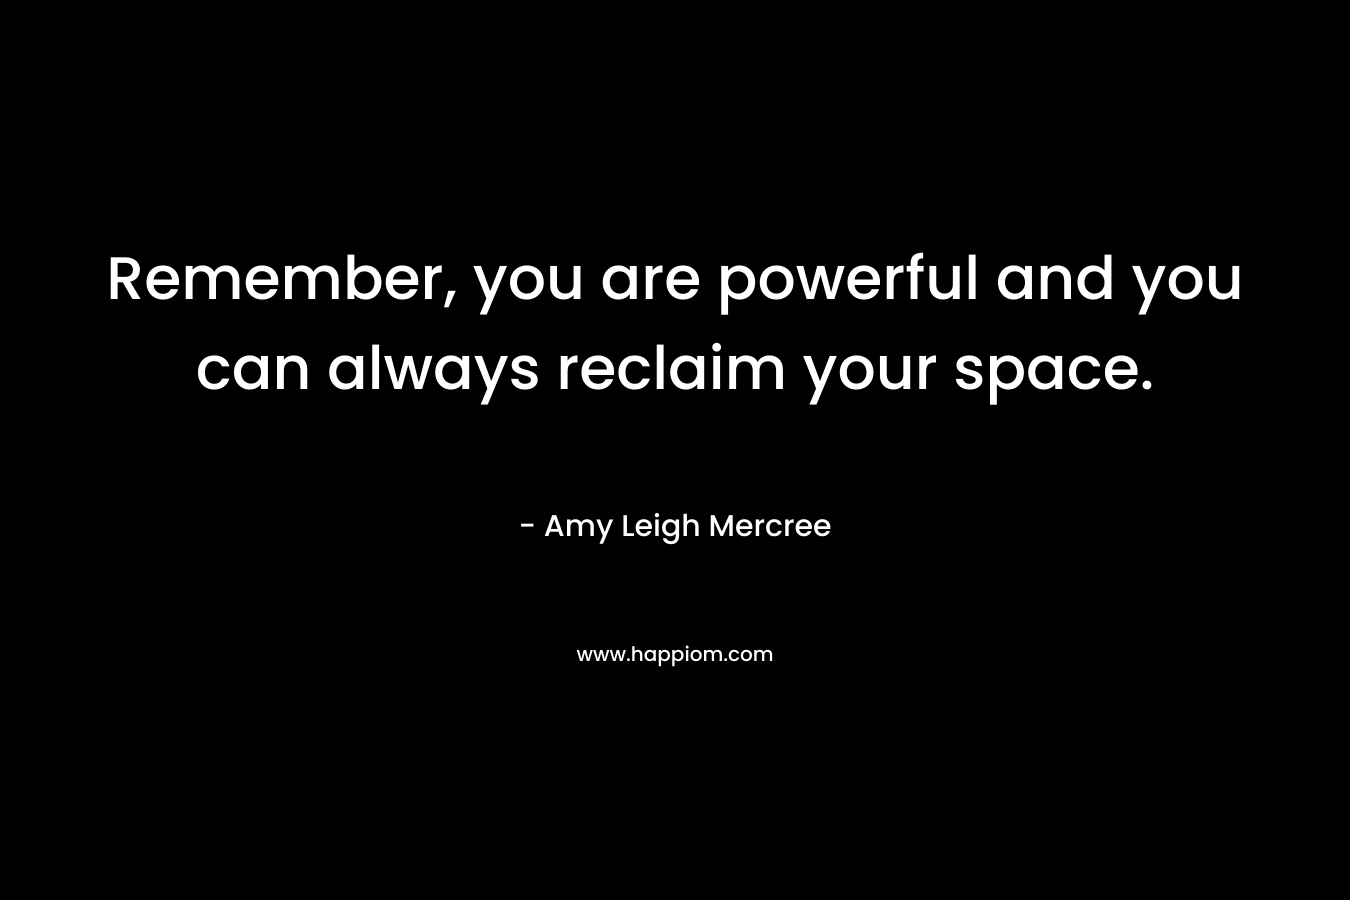 Remember, you are powerful and you can always reclaim your space. – Amy Leigh Mercree